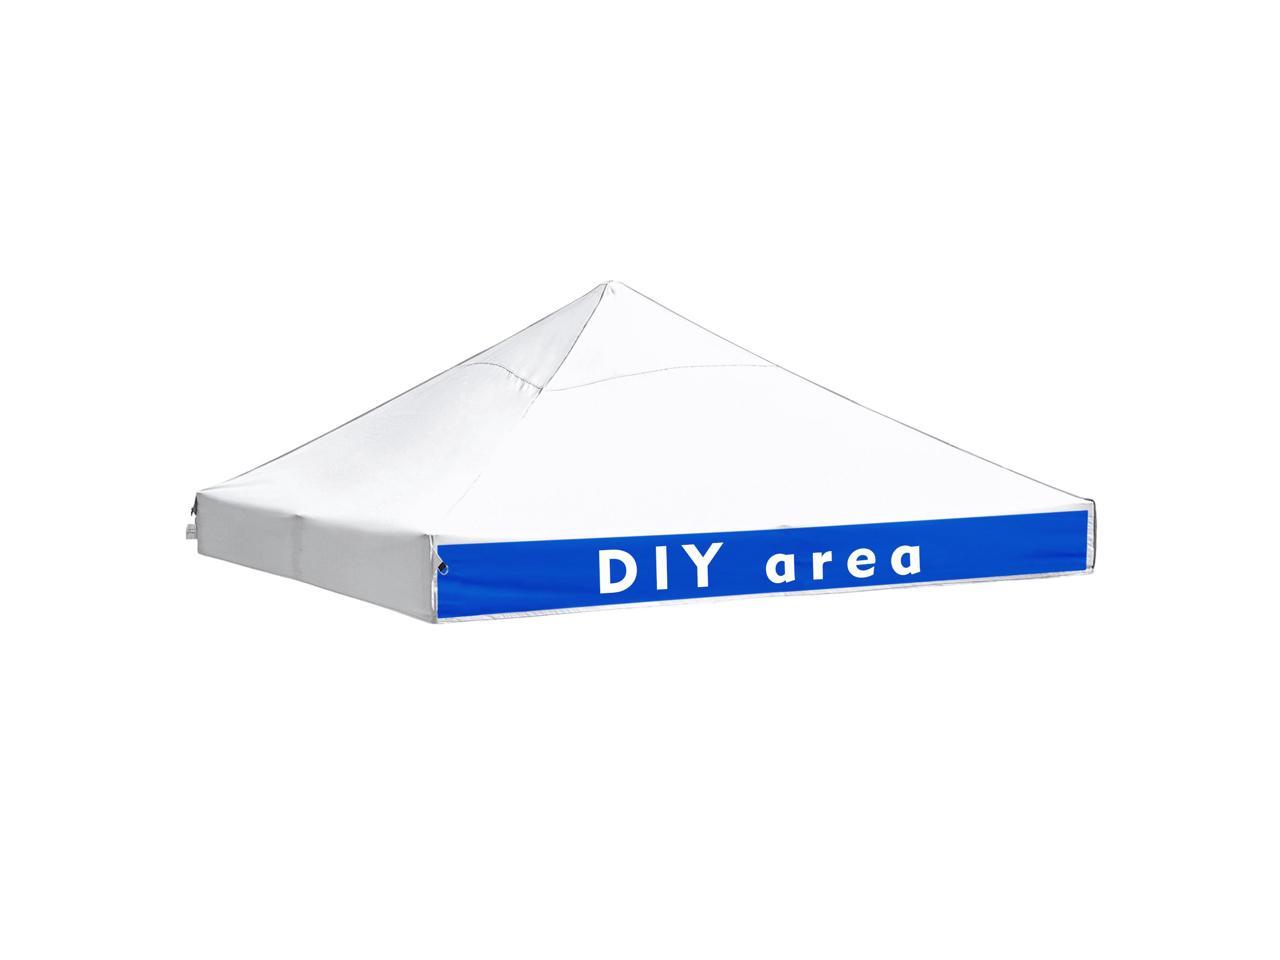 EZ Pop Up Canopy Top Replacement 550D Cover For Commercial Trade Vendor Tent 